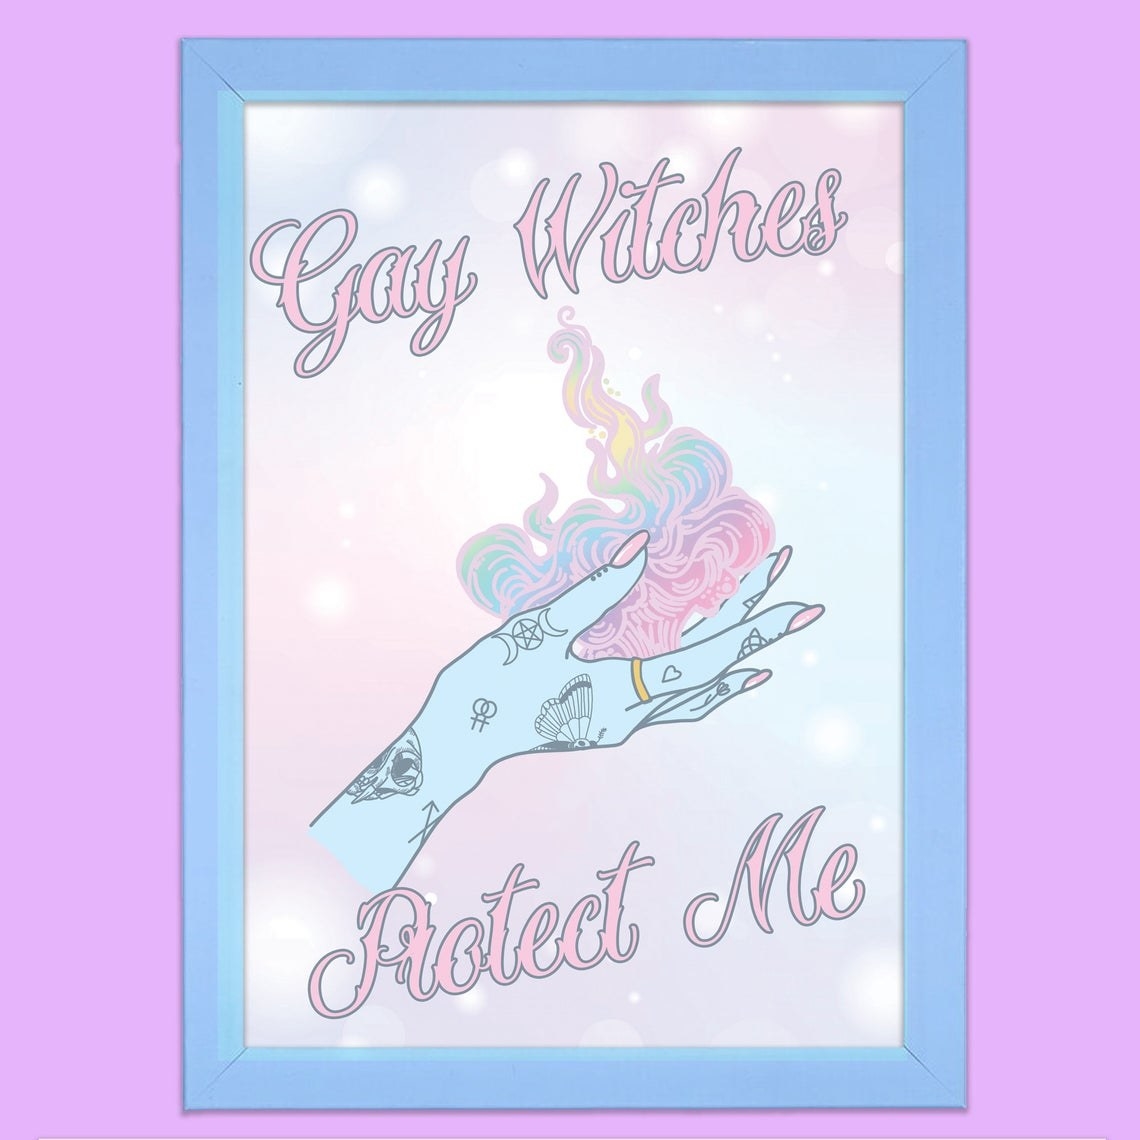 A pastel goth picture of a tattooed hand with flames coming from the palm and the words &quot;Gay Witches Protect Me&quot; around it 